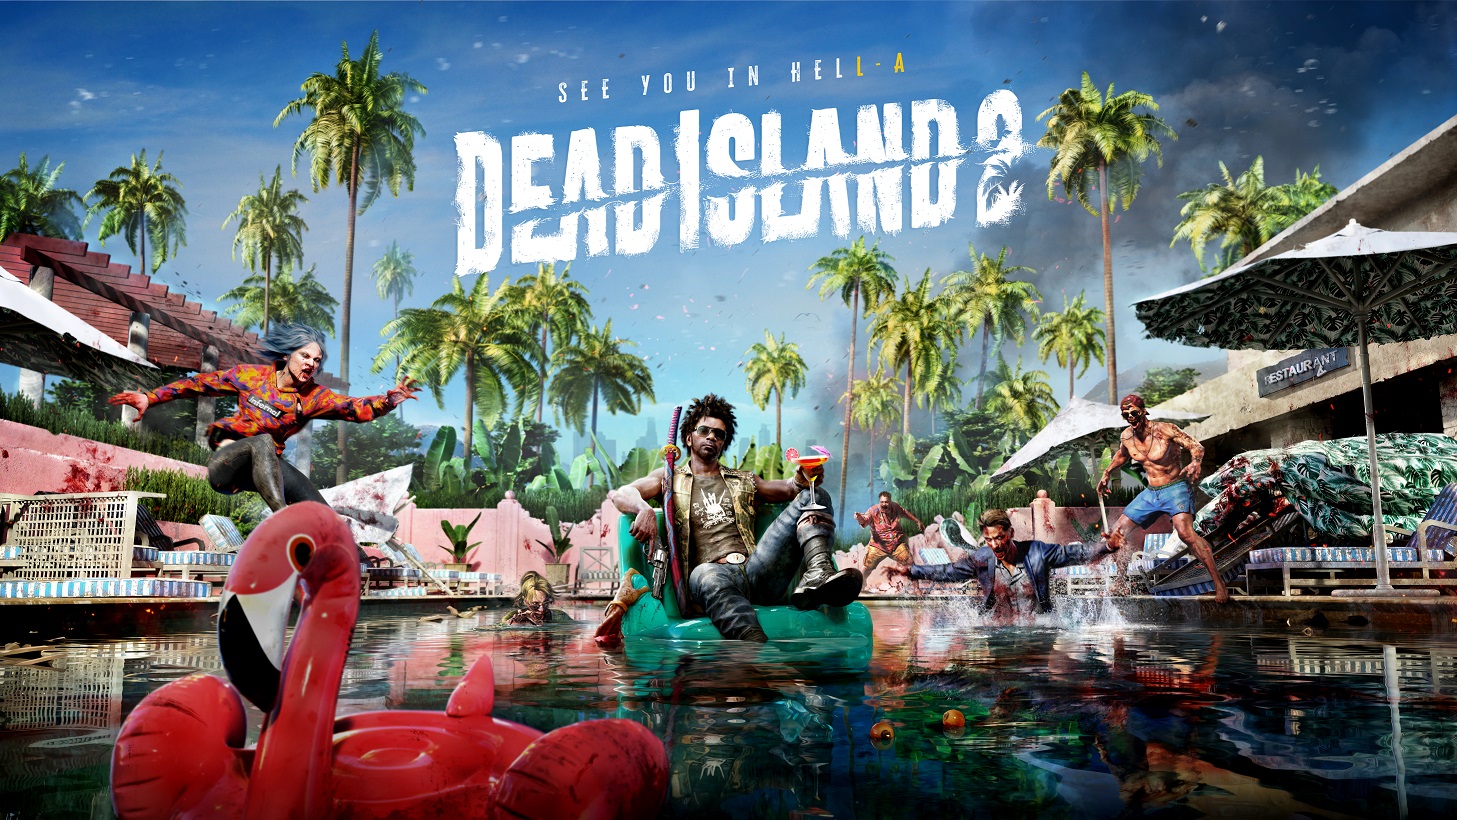 Dead Island 2 moves the release date forward by a week and enters production